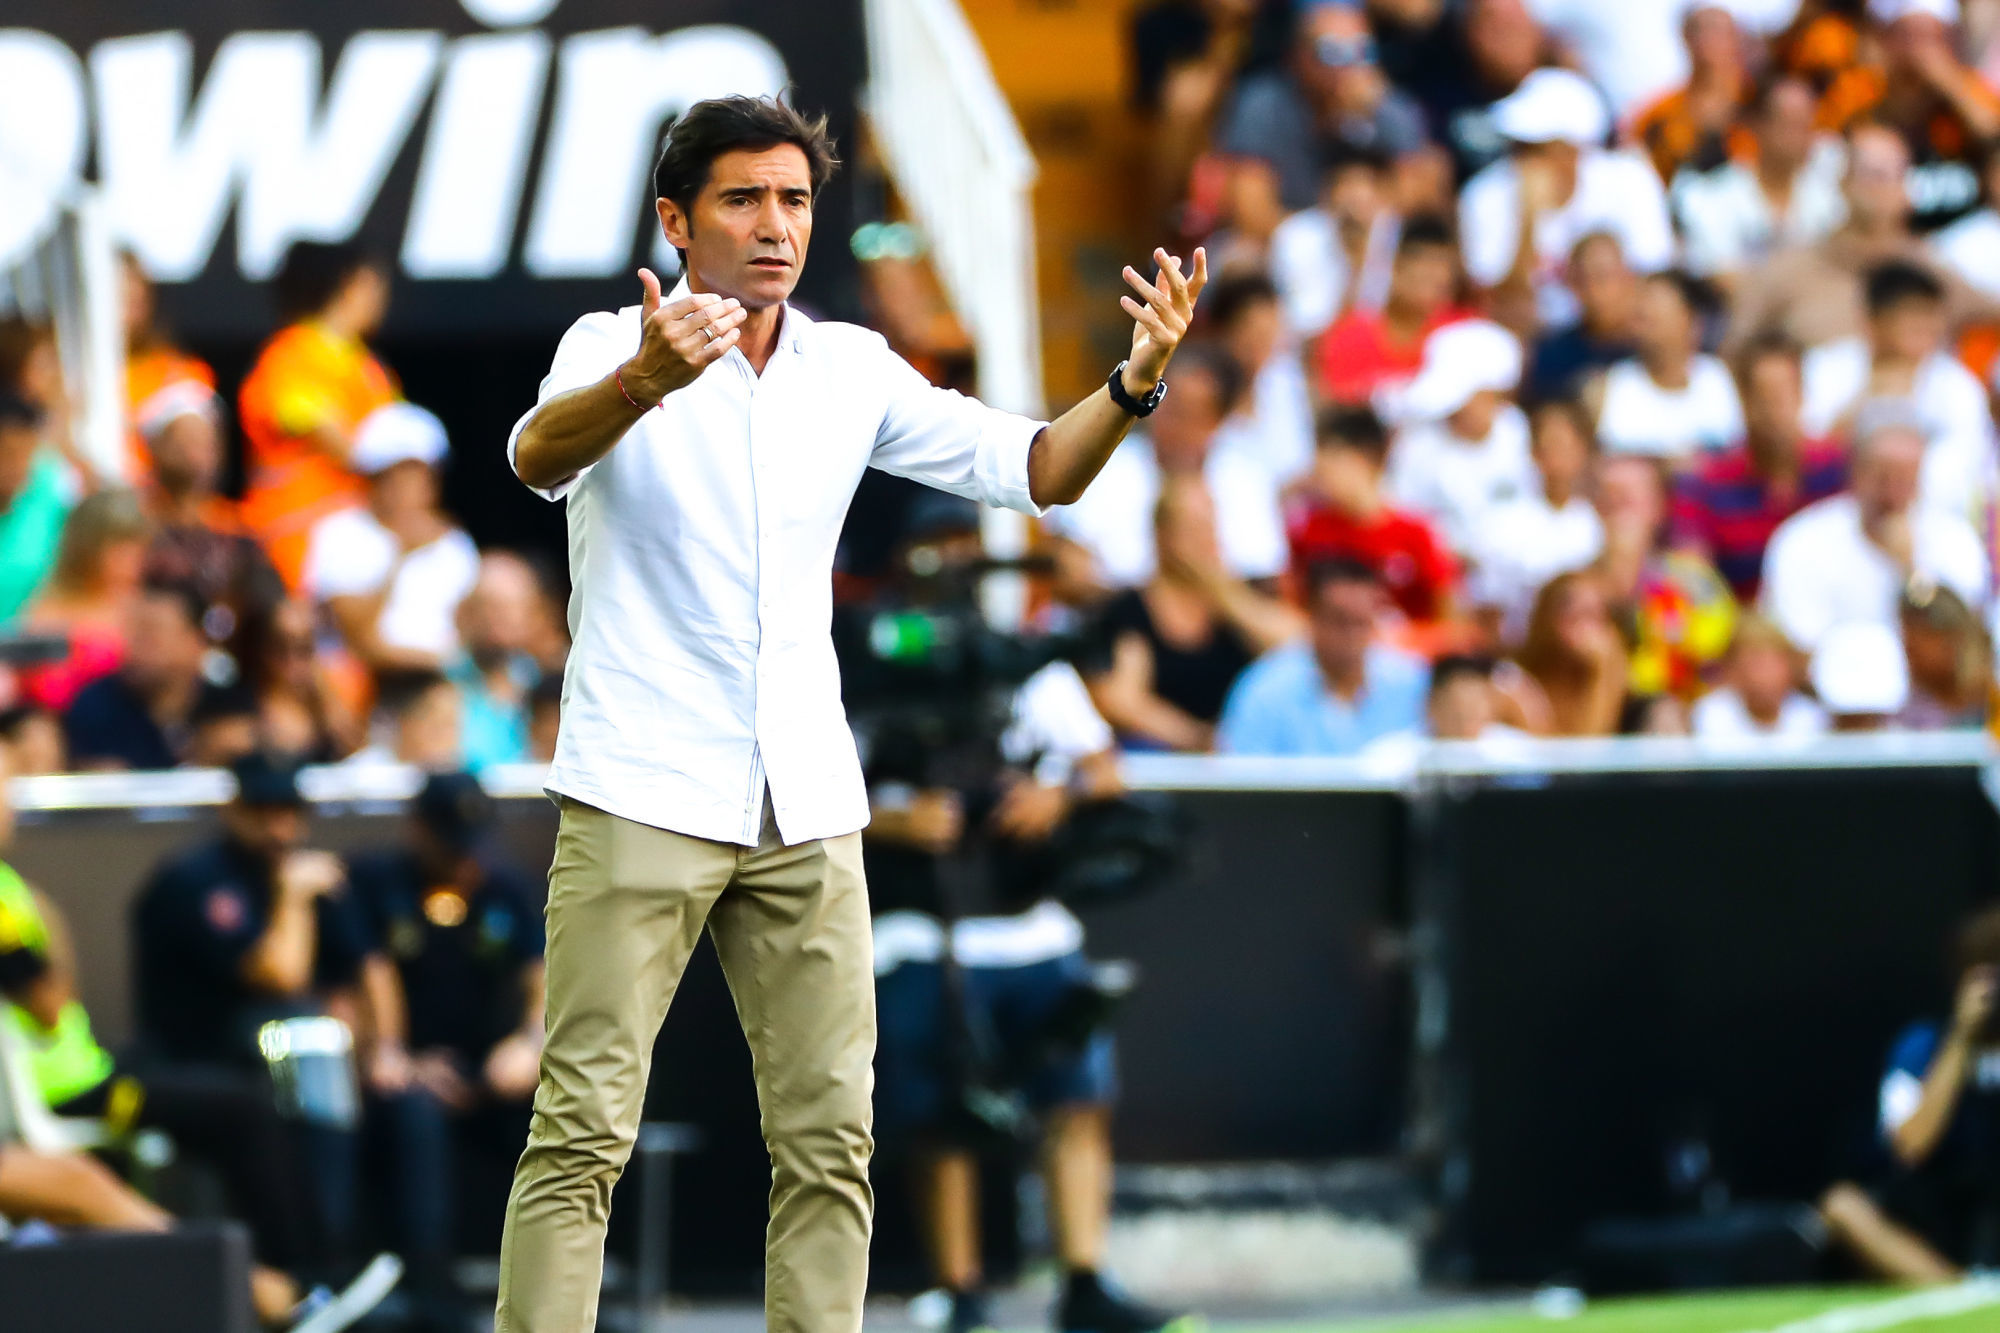 Marcelino during the Liga match between Valencia and Mallorca on 1st September 2019
Photo : Marca / Icon Sport